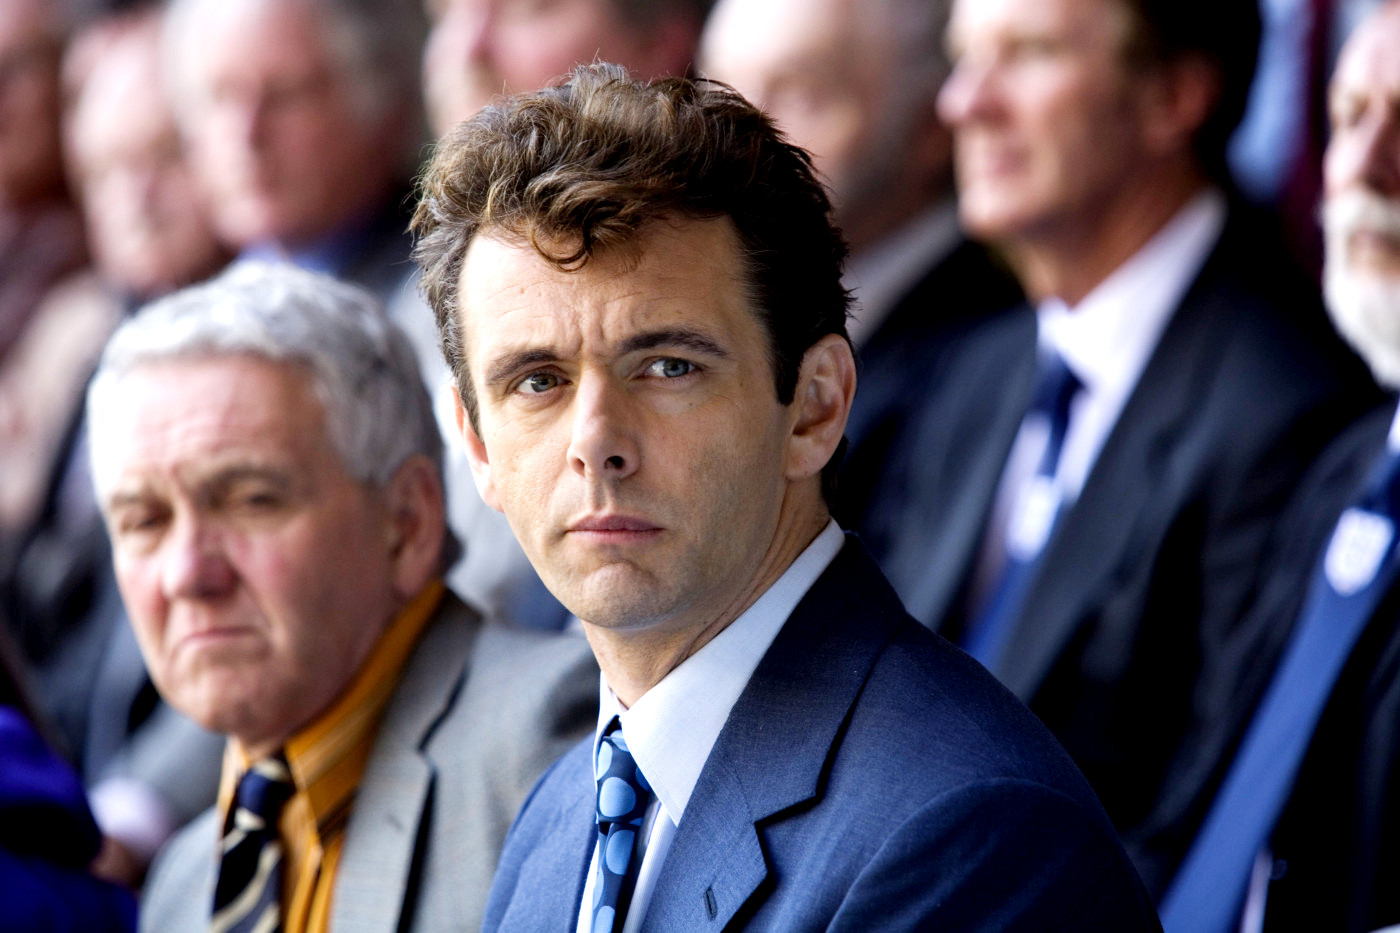 Michael Sheen stars as Brian Clough in Sony Pictures Classics' The Damned United (2009). Photo credit by Laurie Sparham.